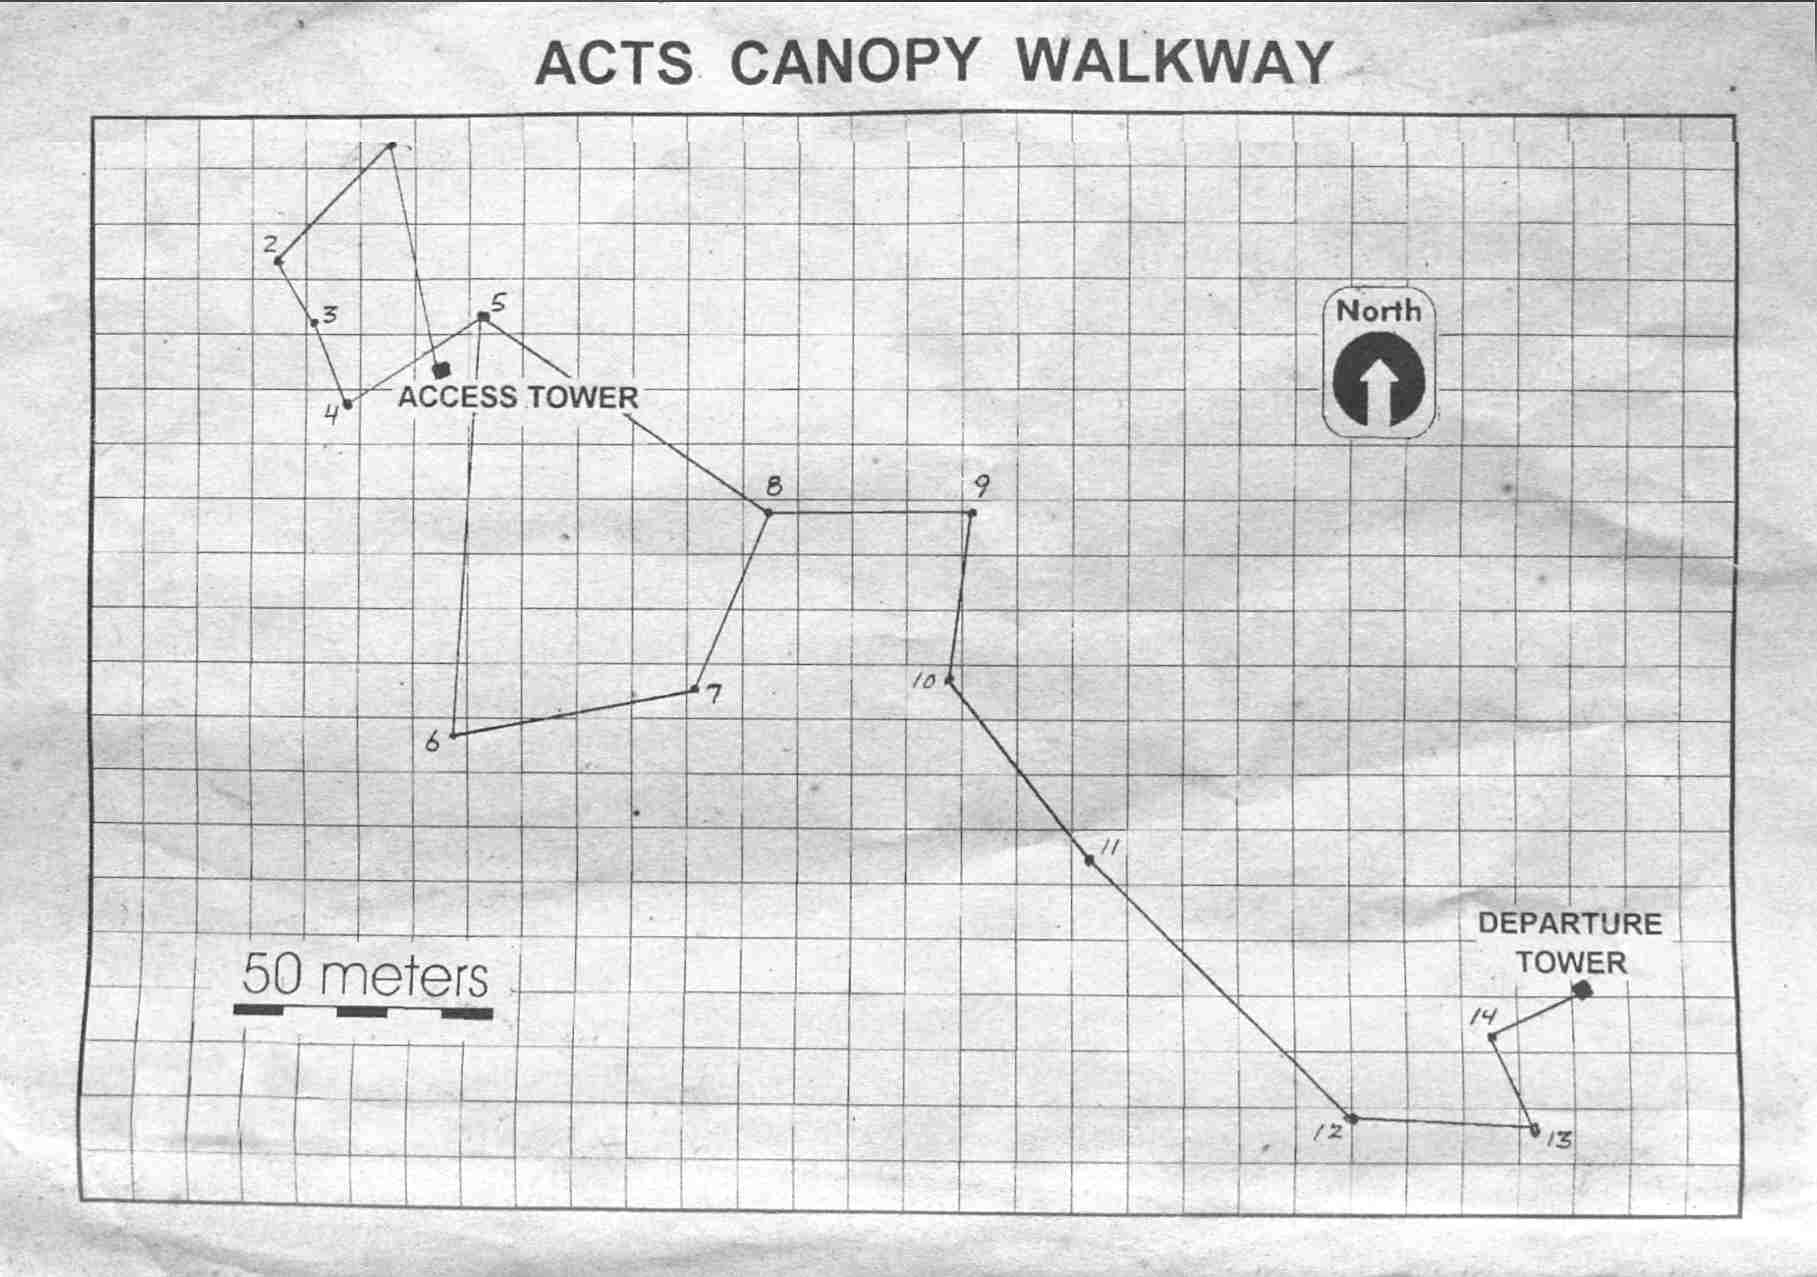 [Image of ACTS canopy walkway map]